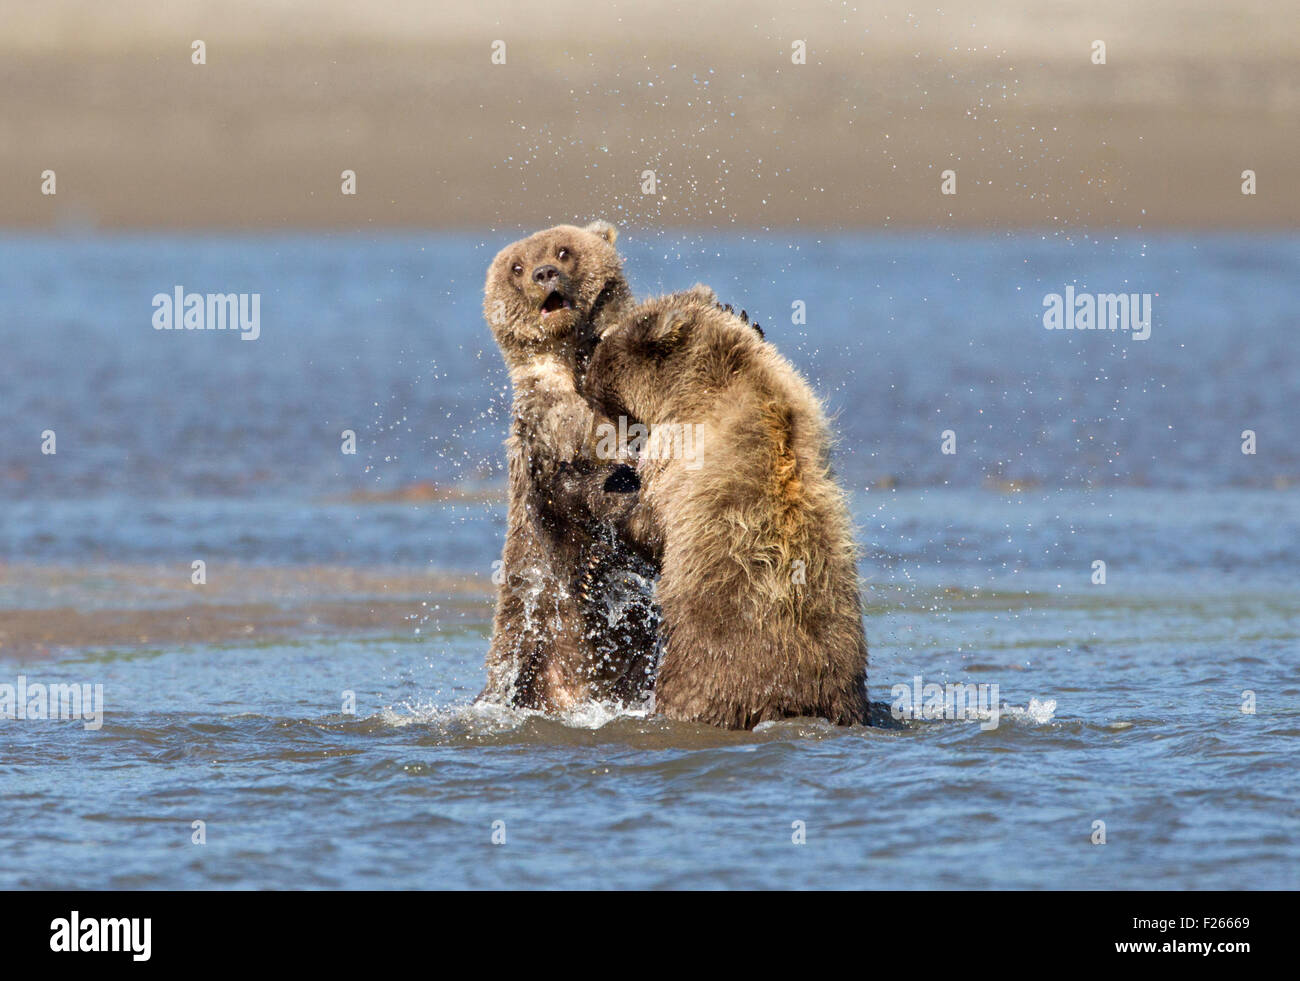 Grizzly Bear Cubs Play Fighting Stock Photo